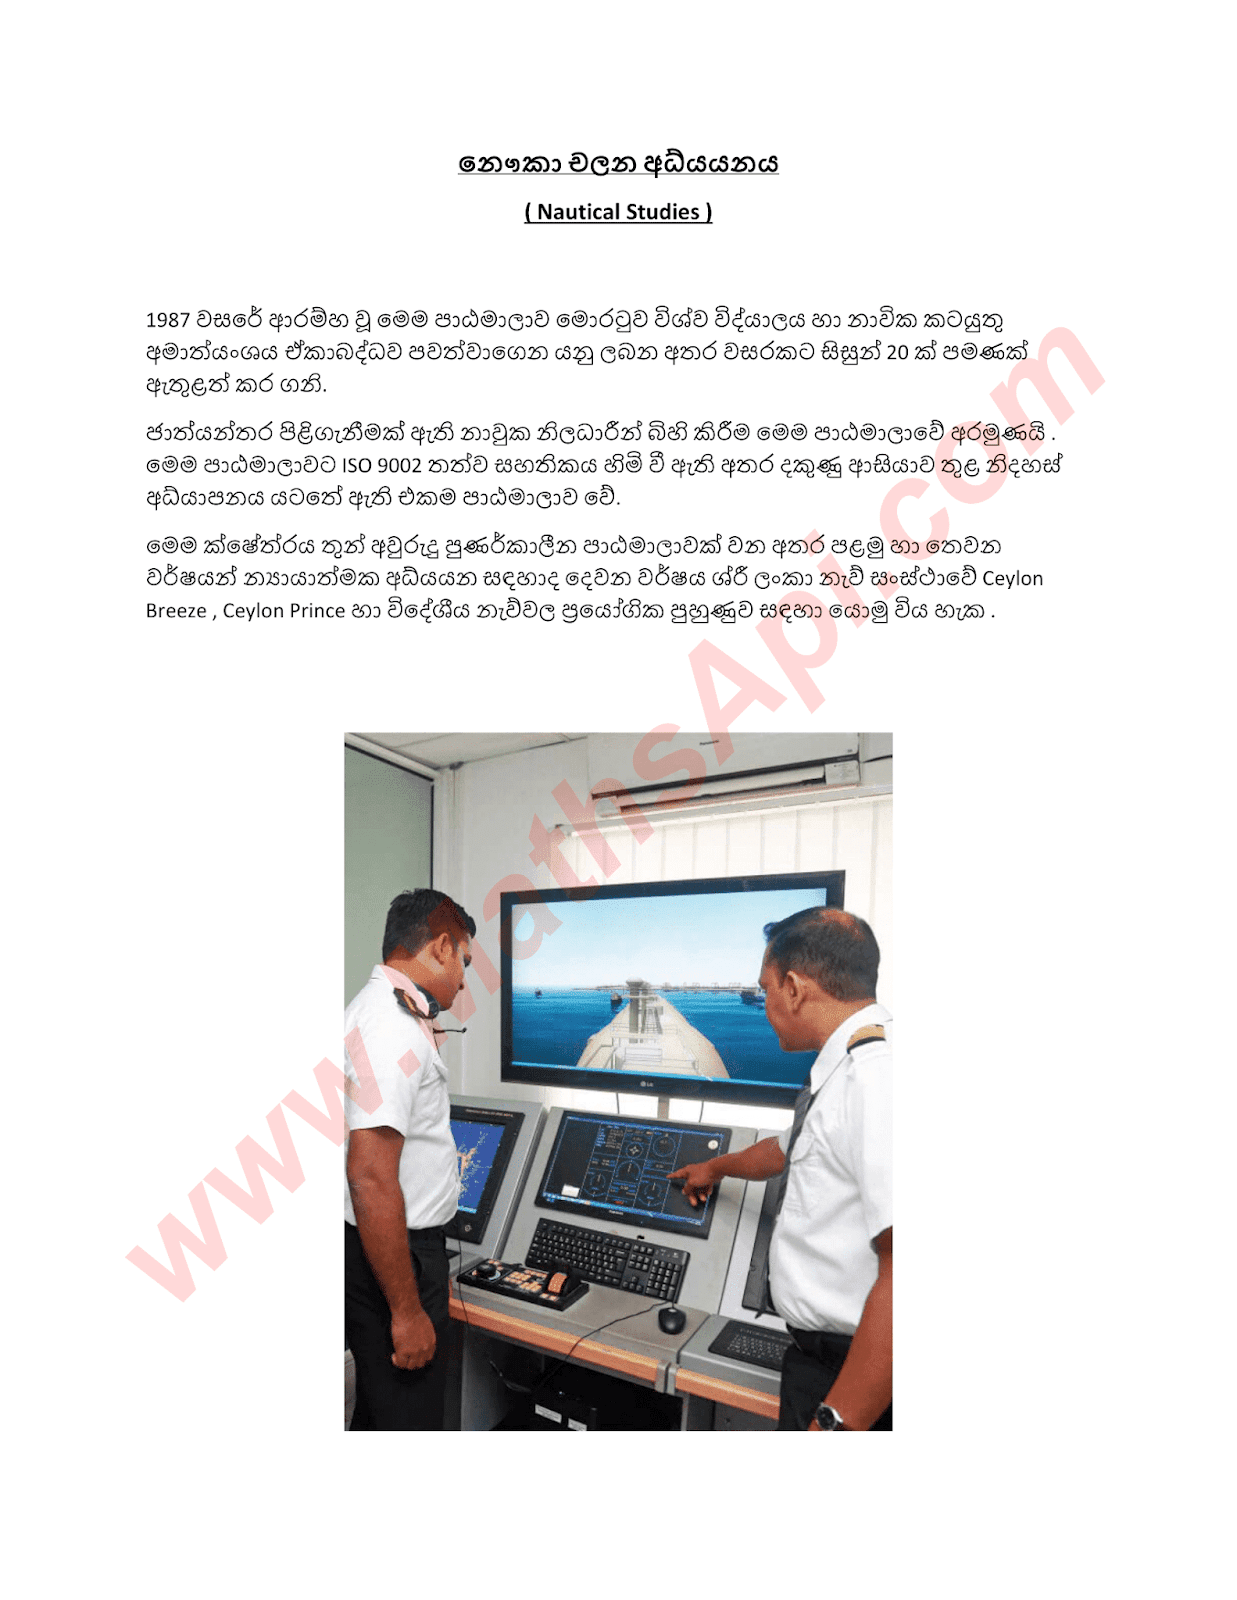 what-is-ndt-in-university-of-moratuwa-mathsapi-largest-online-mathematic-educational-website